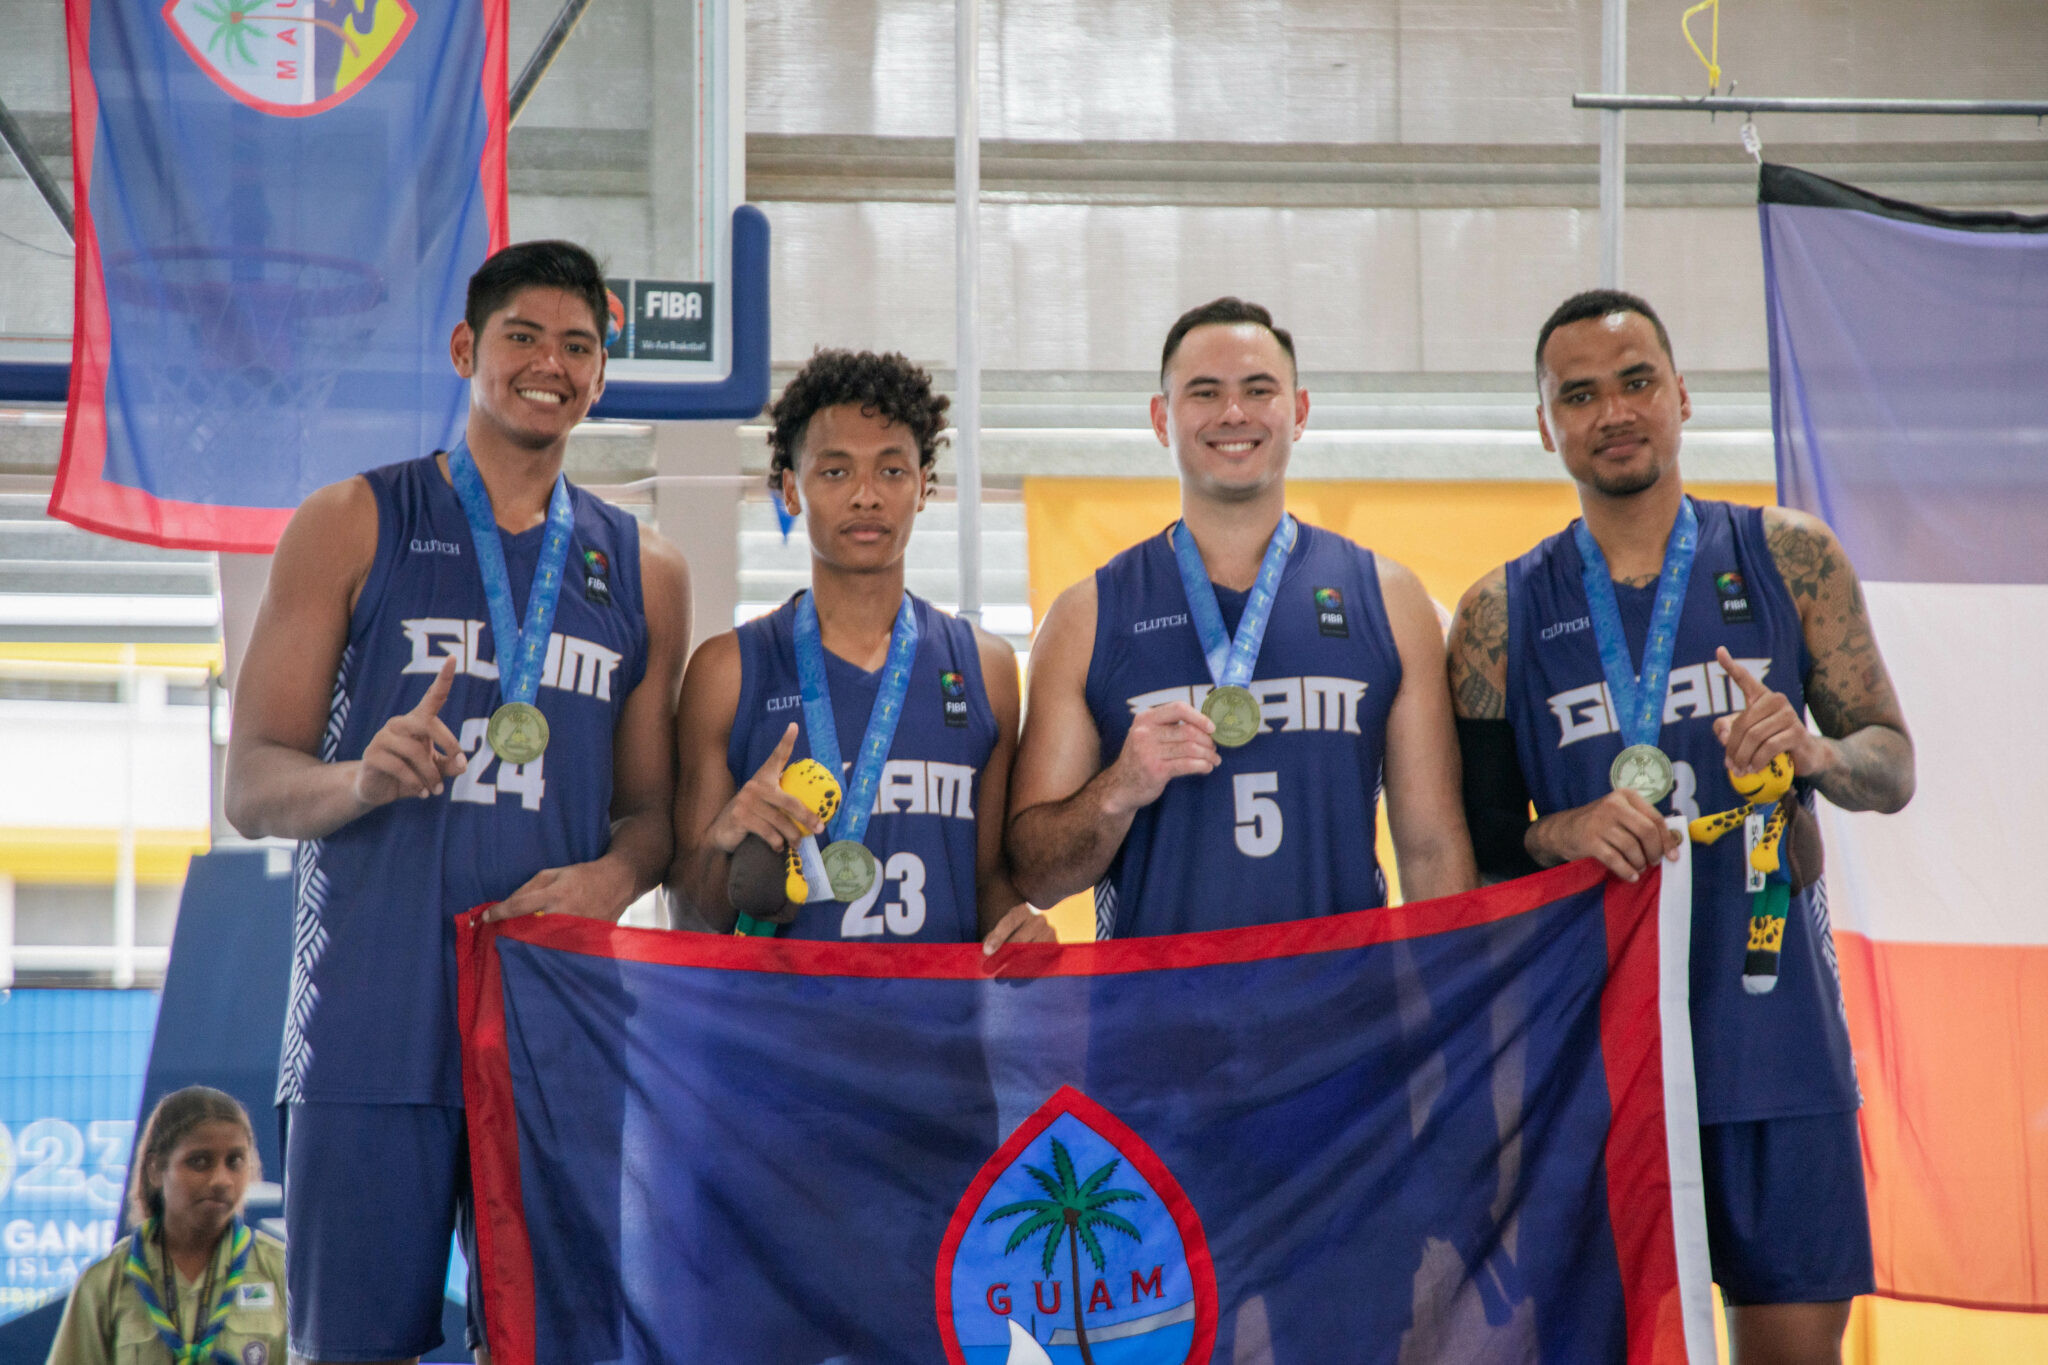 Guam Wom 3x3 basketball - Tahiti won gold in the women’s competition. Photos: Jimmy Tura, Pacific Games News Service
